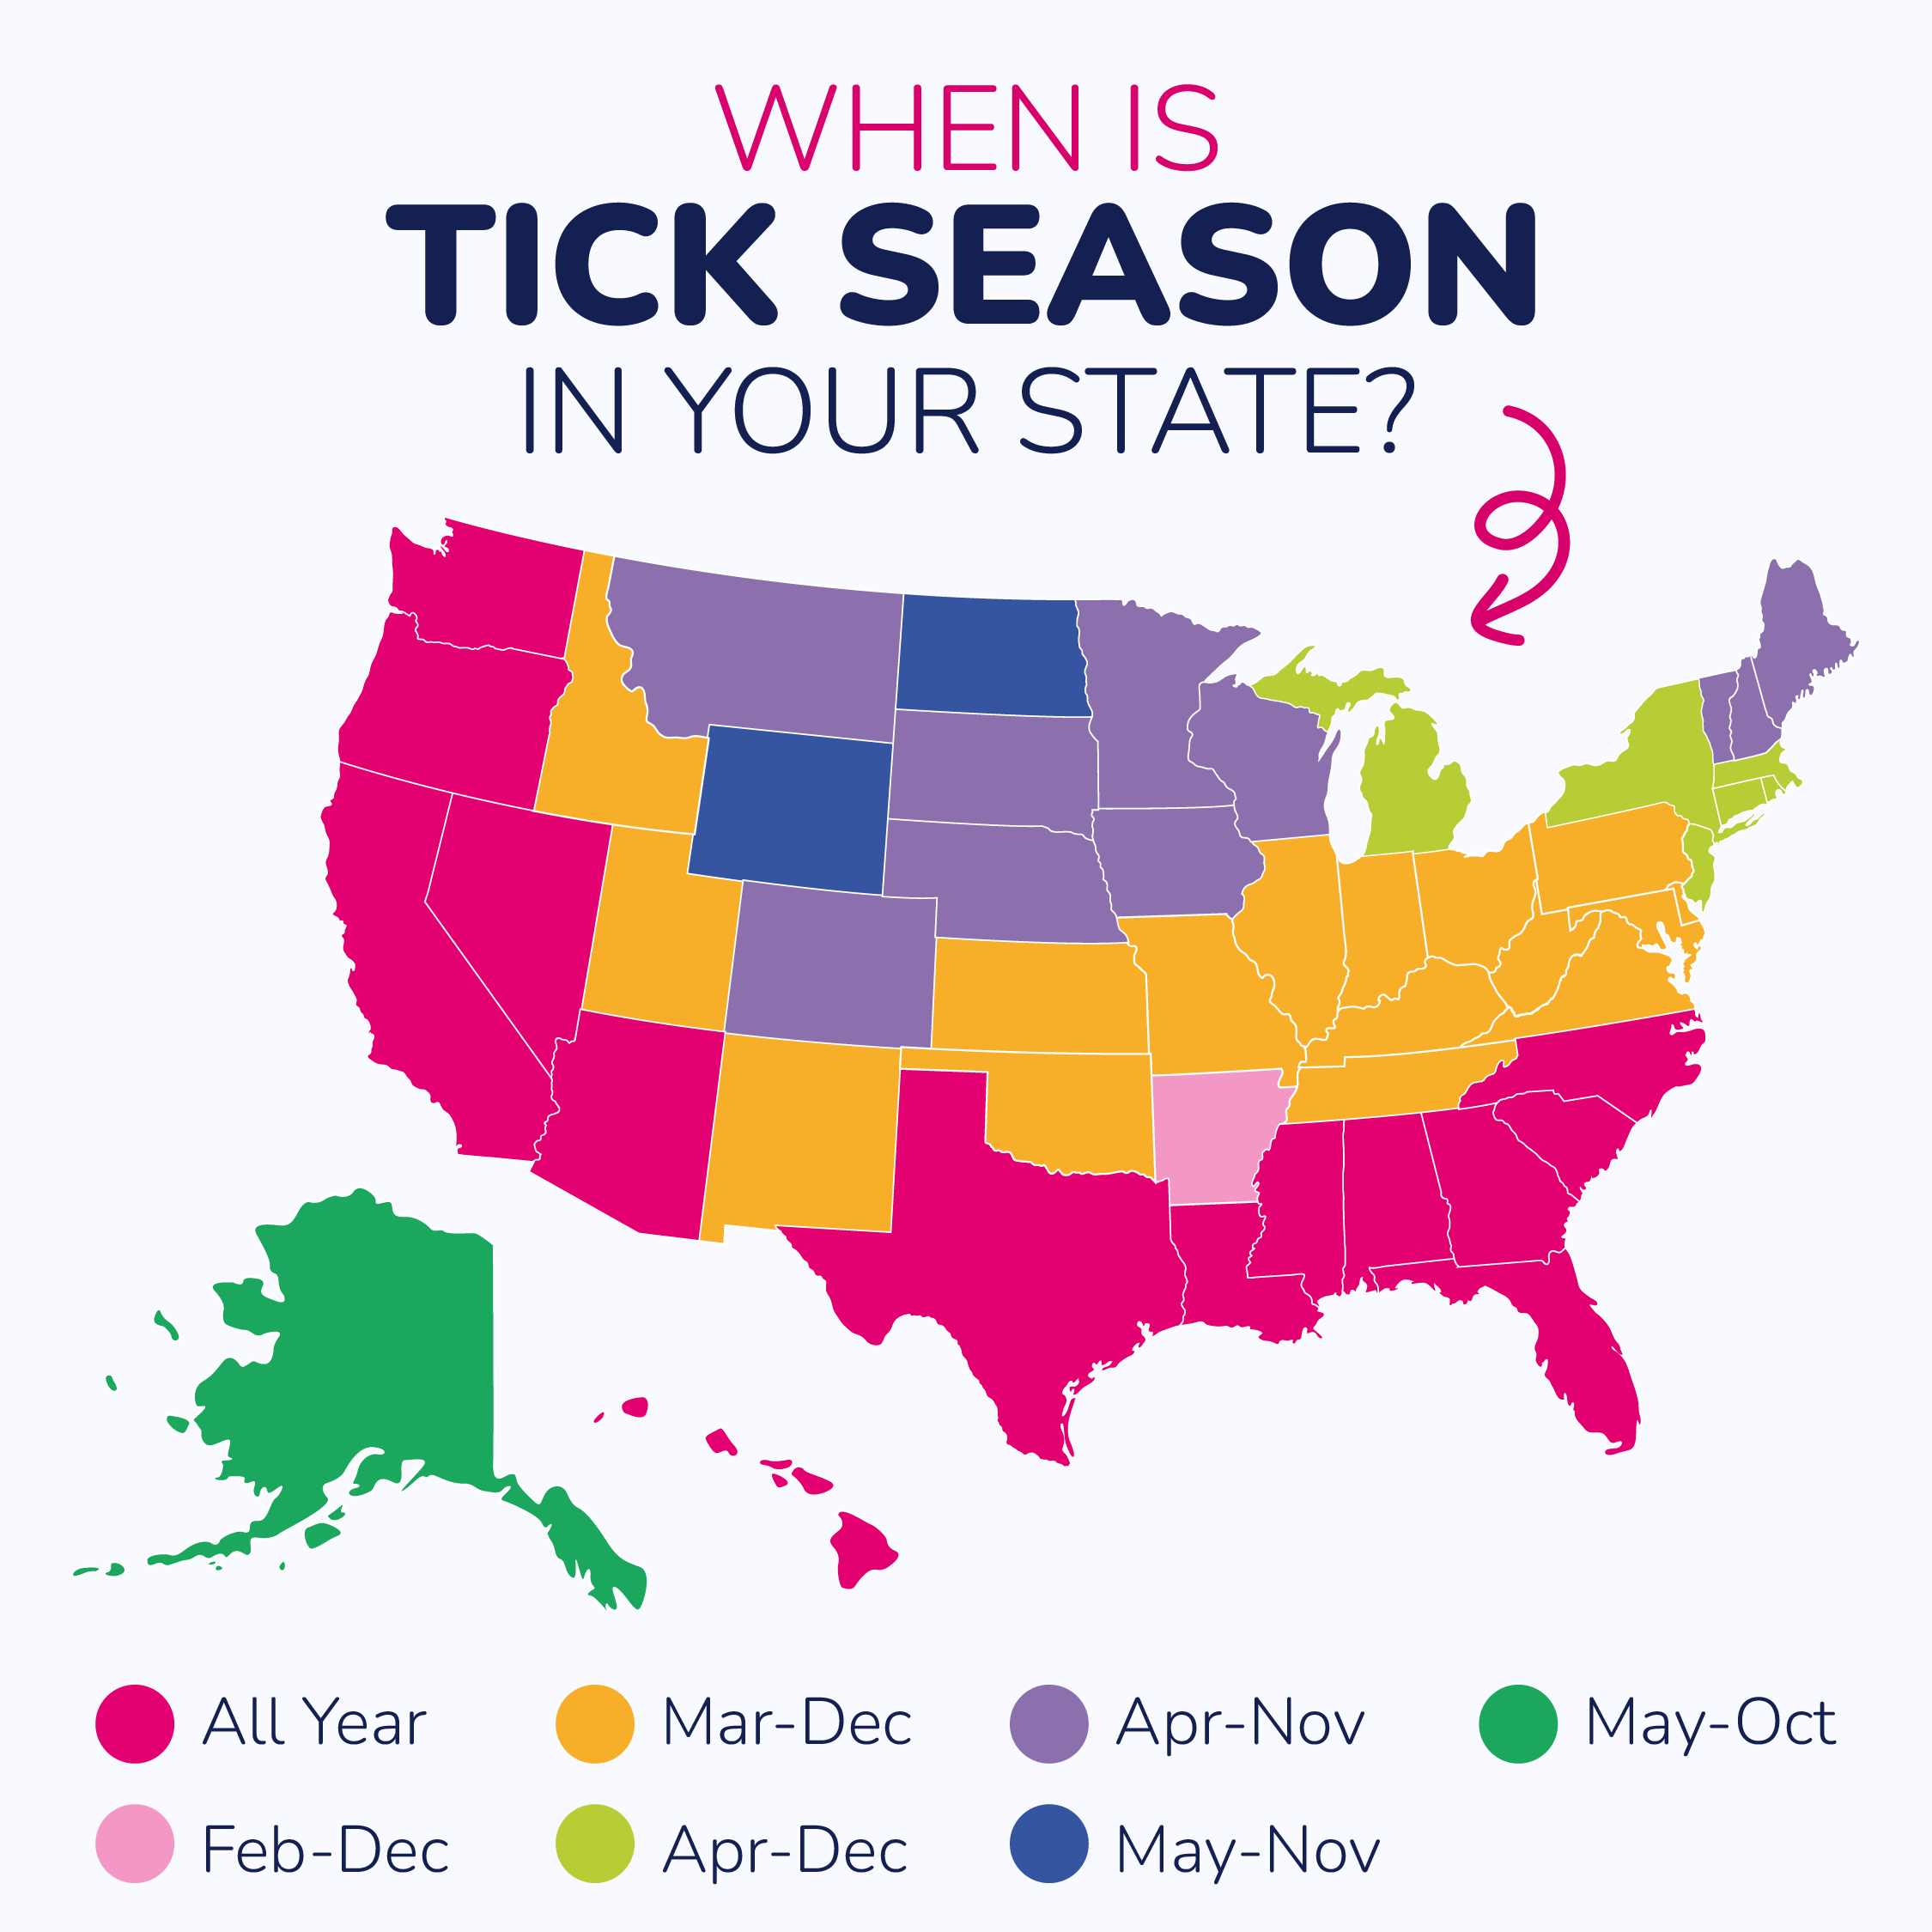 An infographic about tick seasons for each state in the U.S.